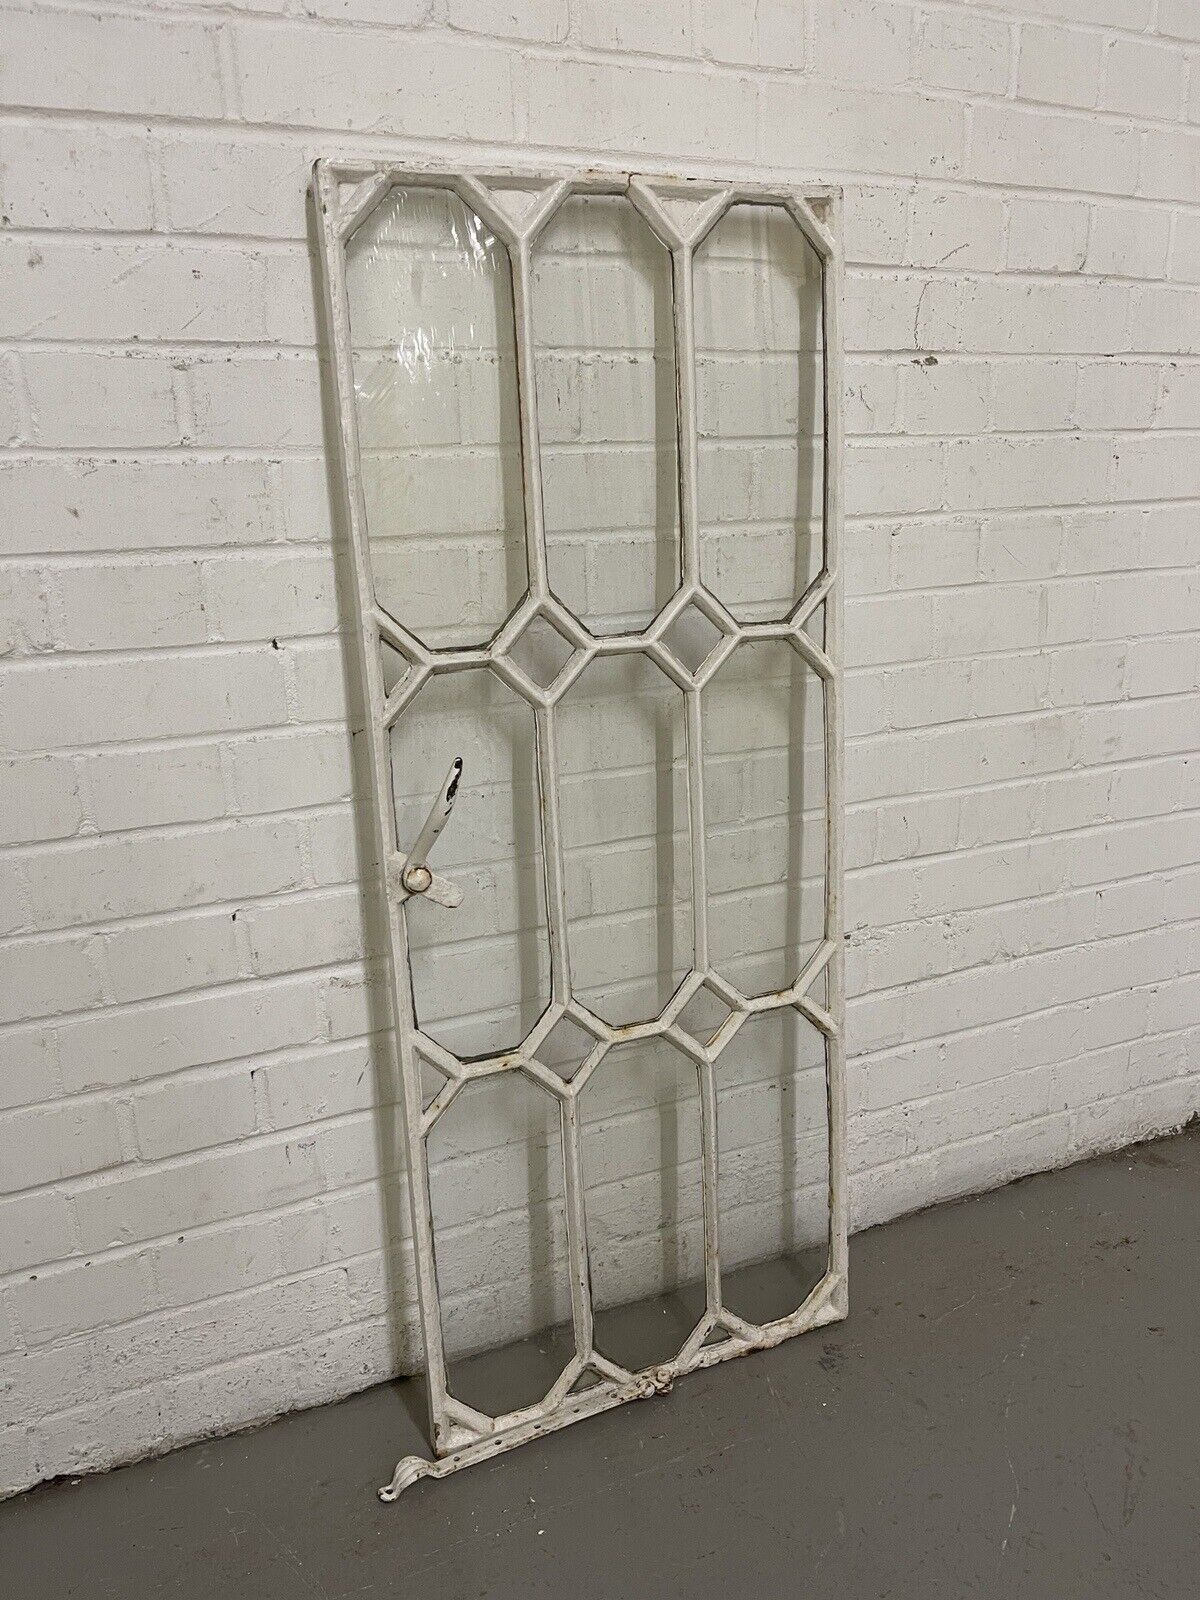 Reclaimed Art and Crafts Cast Iron Crittall Crittal Windows 1135 x 462mm